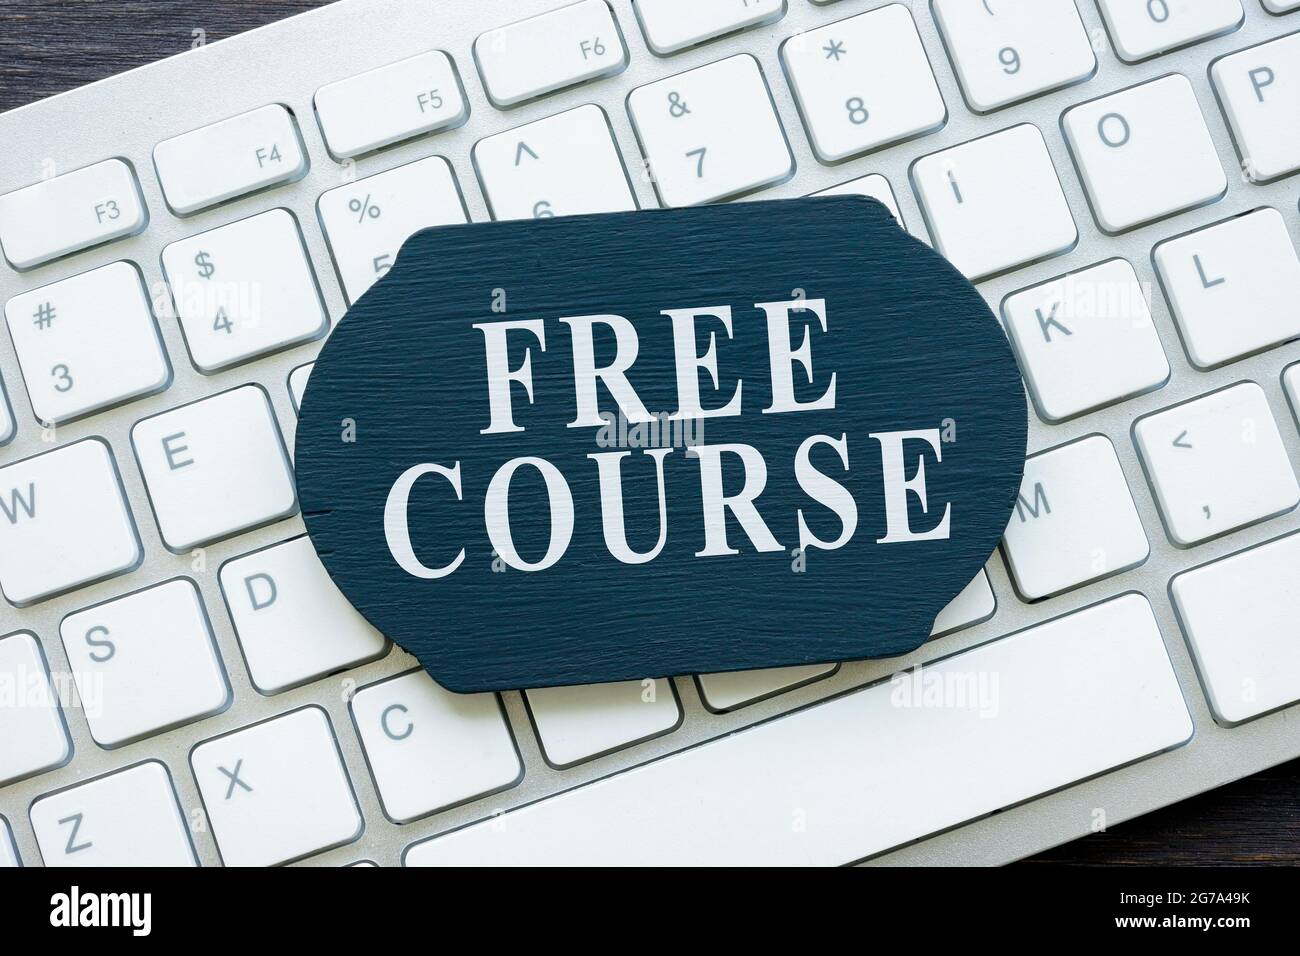 Free online course on the plate and keyboard. Stock Photo